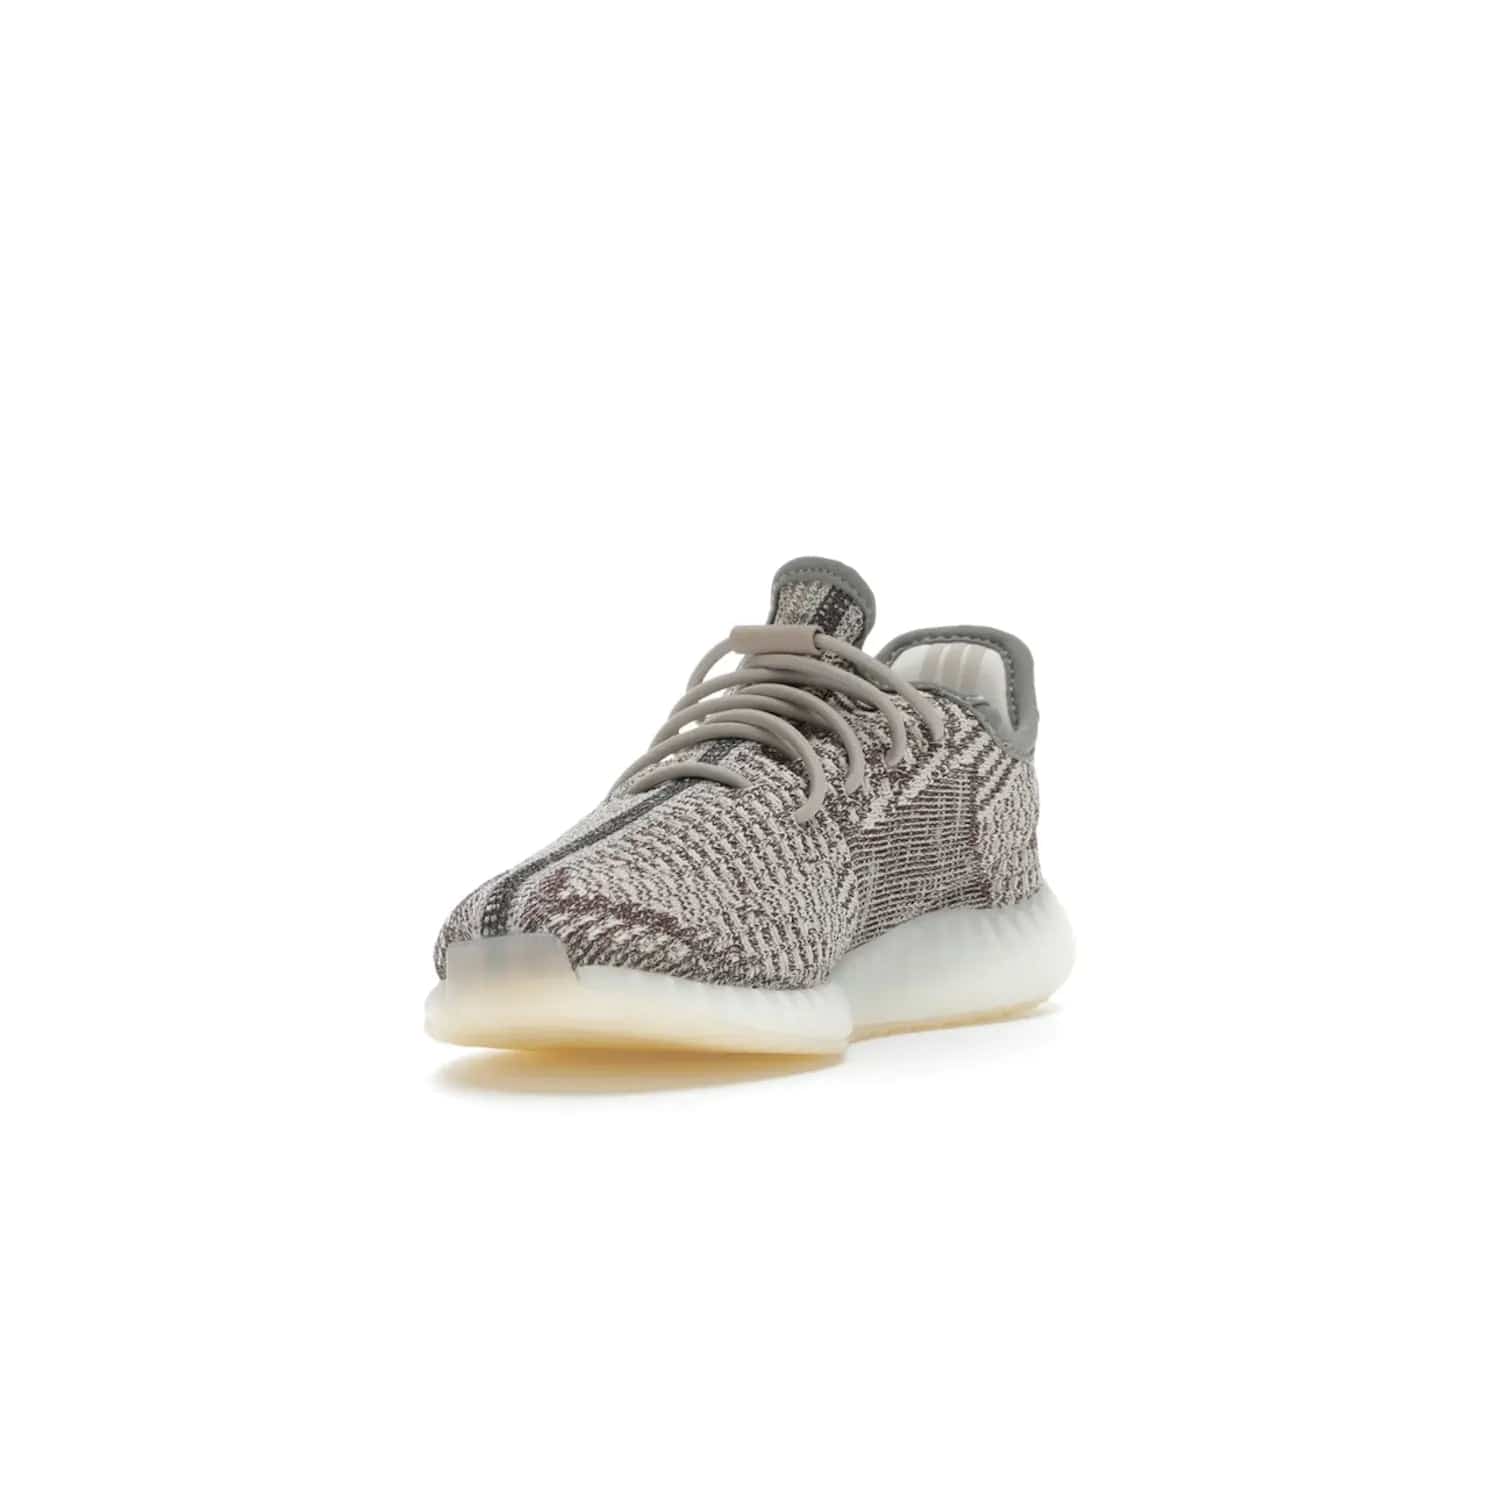 adidas Yeezy Boost 350 V2 Zyon (Kids) - Image 13 - Only at www.BallersClubKickz.com - The adidas Yeezy Boost 350 V2 Zyon (Kids) - perfect pick for fashion-savvy kids. Features soft Primeknit upper, lace closure & colorful patterning. Comfort & style for kids' summer outfits!